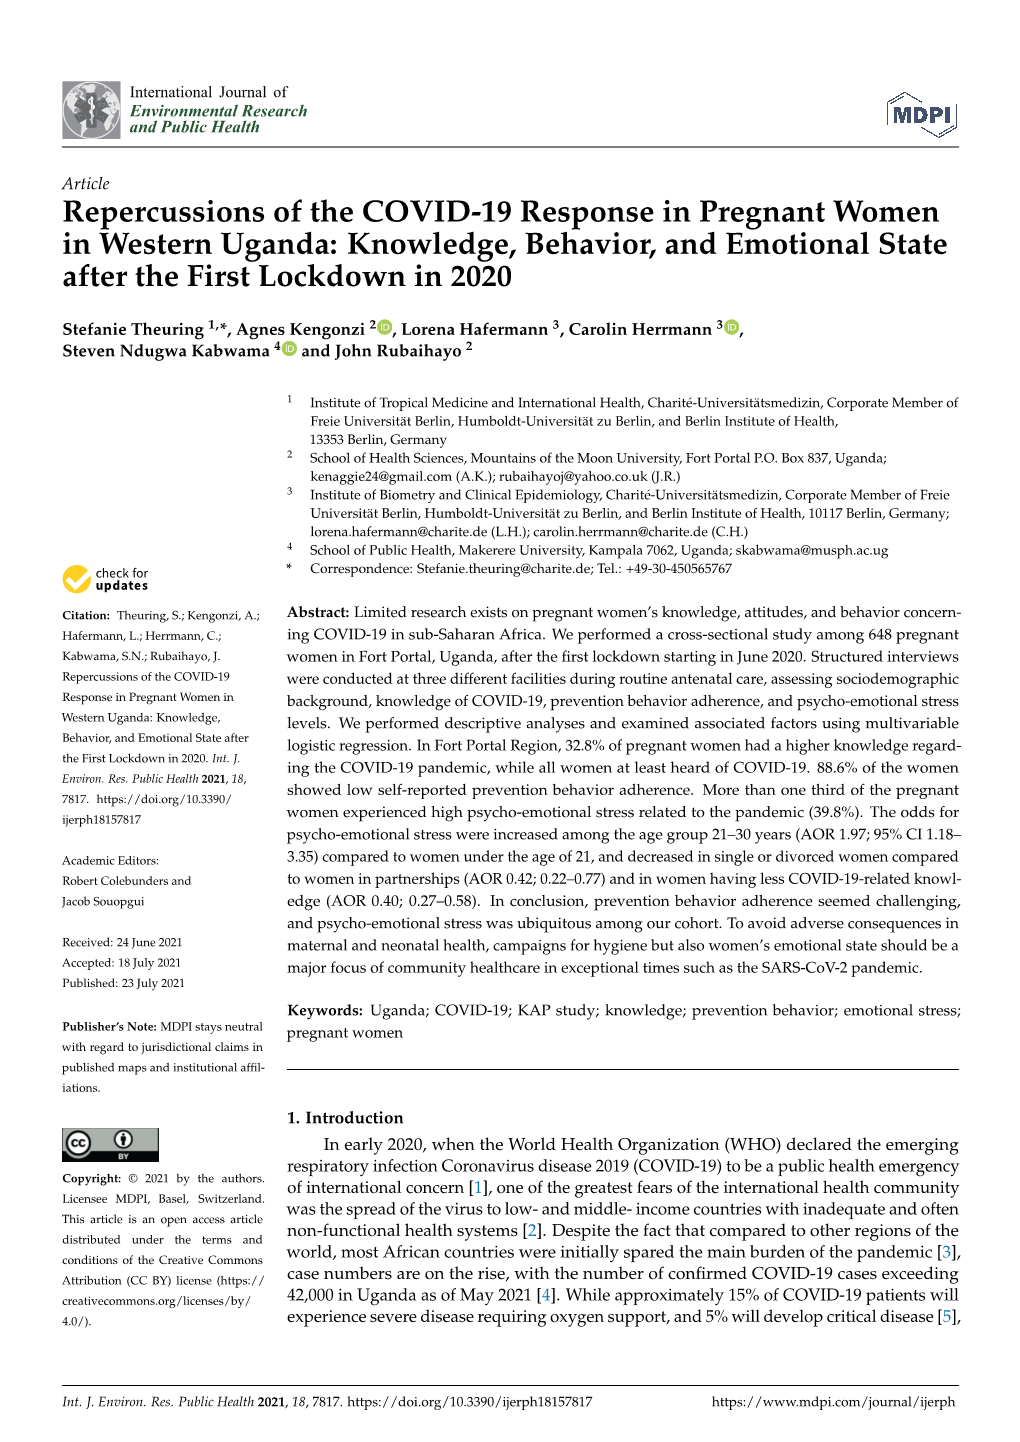 Repercussions of the COVID-19 Response in Pregnant Women in Western Uganda: Knowledge, Behavior, and Emotional State After the First Lockdown in 2020